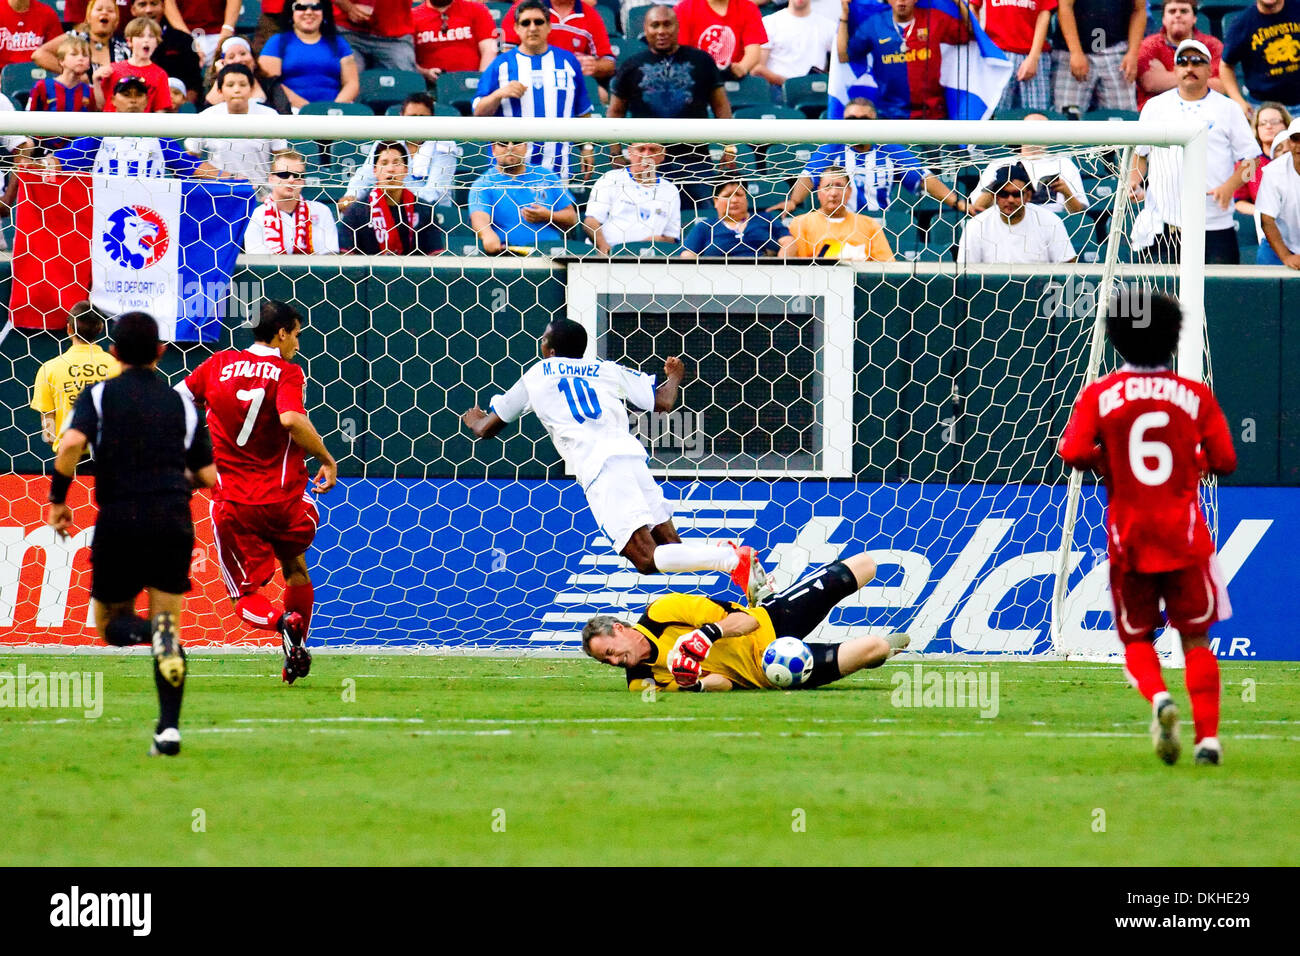 Canada's goalkeeper Greg Sutton (1) blocking the shot attempt of Honduras' attacker Marvin Chavez (10) during the CONCACAF Gold Cup quarter finals match between Canada and Honduras at Lincoln Financial Field in Philadelphia, Pennsylvania. (Credit Image: © Chris Szagola/Southcreek Global/ZUMApress.com) Stock Photo